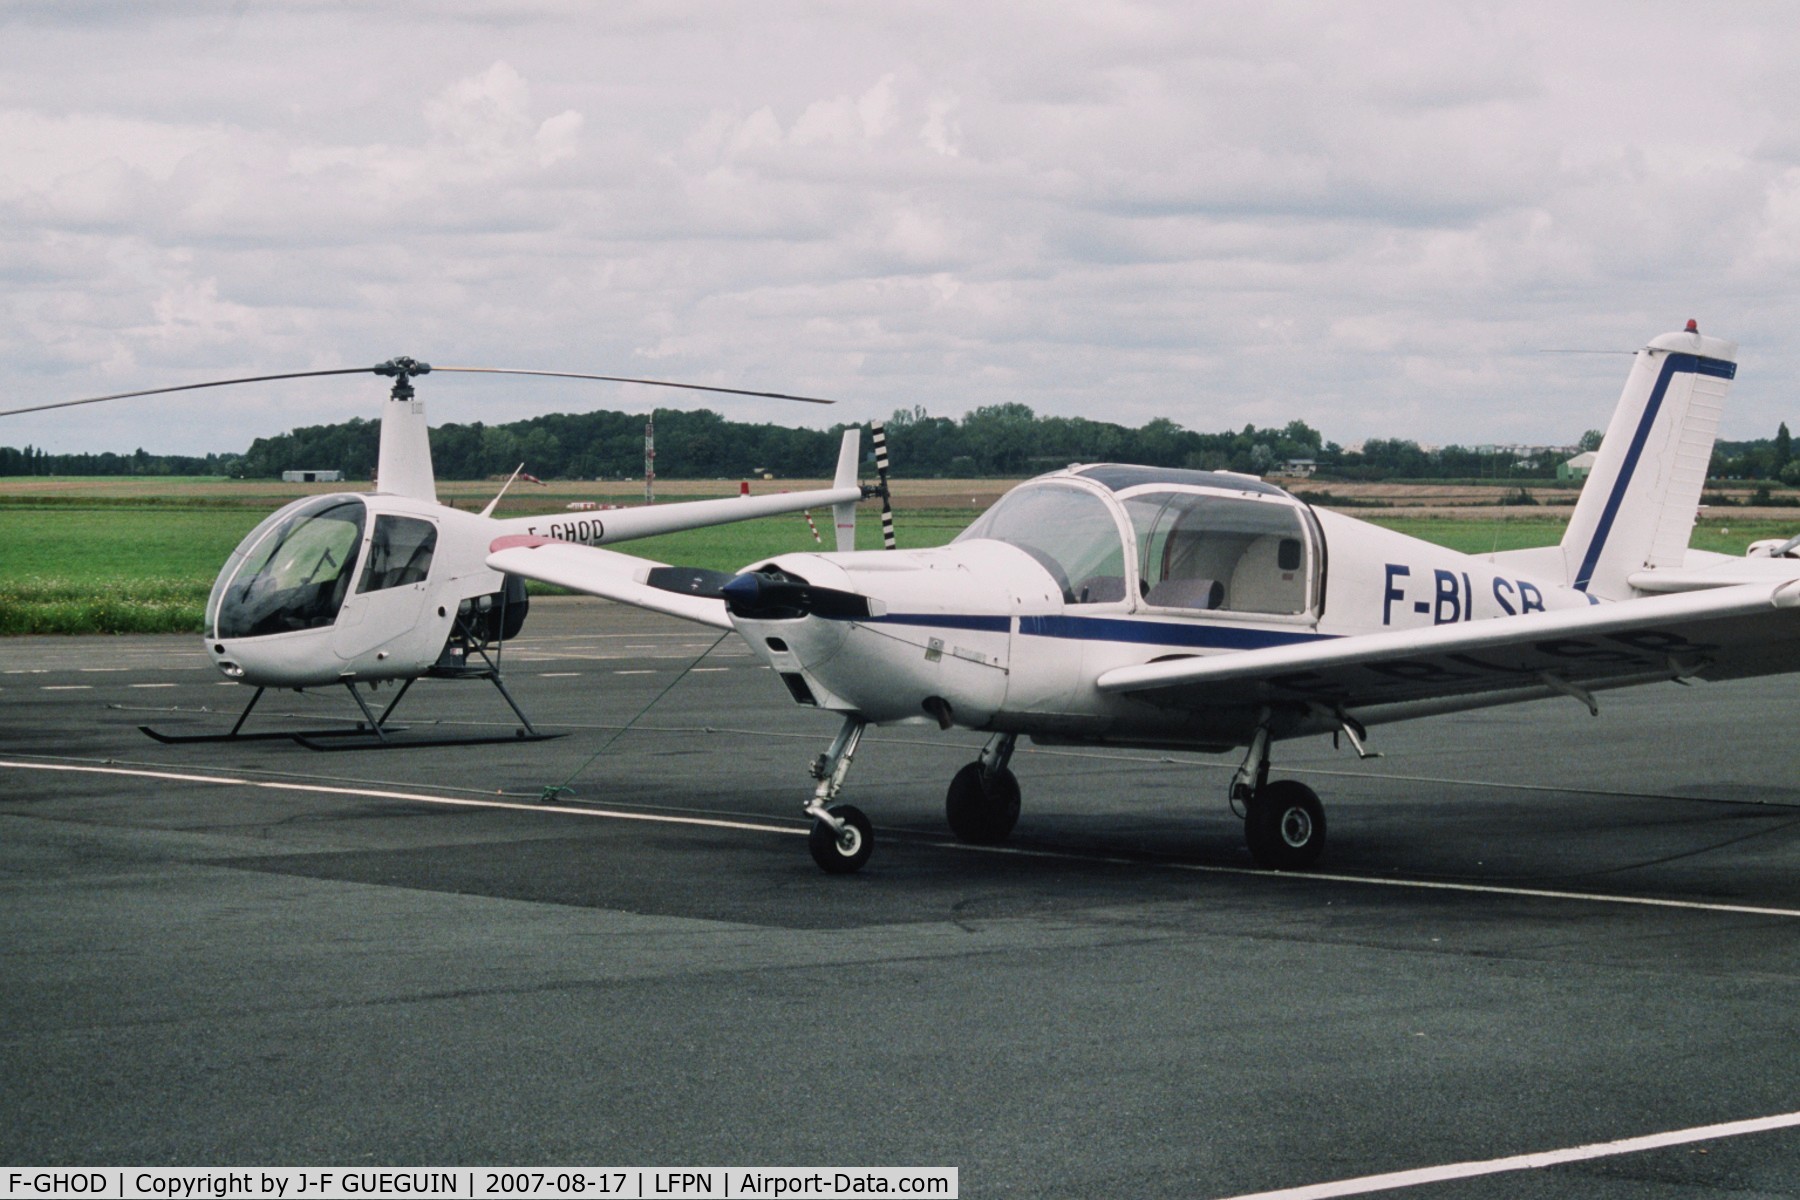 F-GHOD, Robinson R22 Beta C/N 1157, Parked at Paris/Toussus-le-Noble airport.